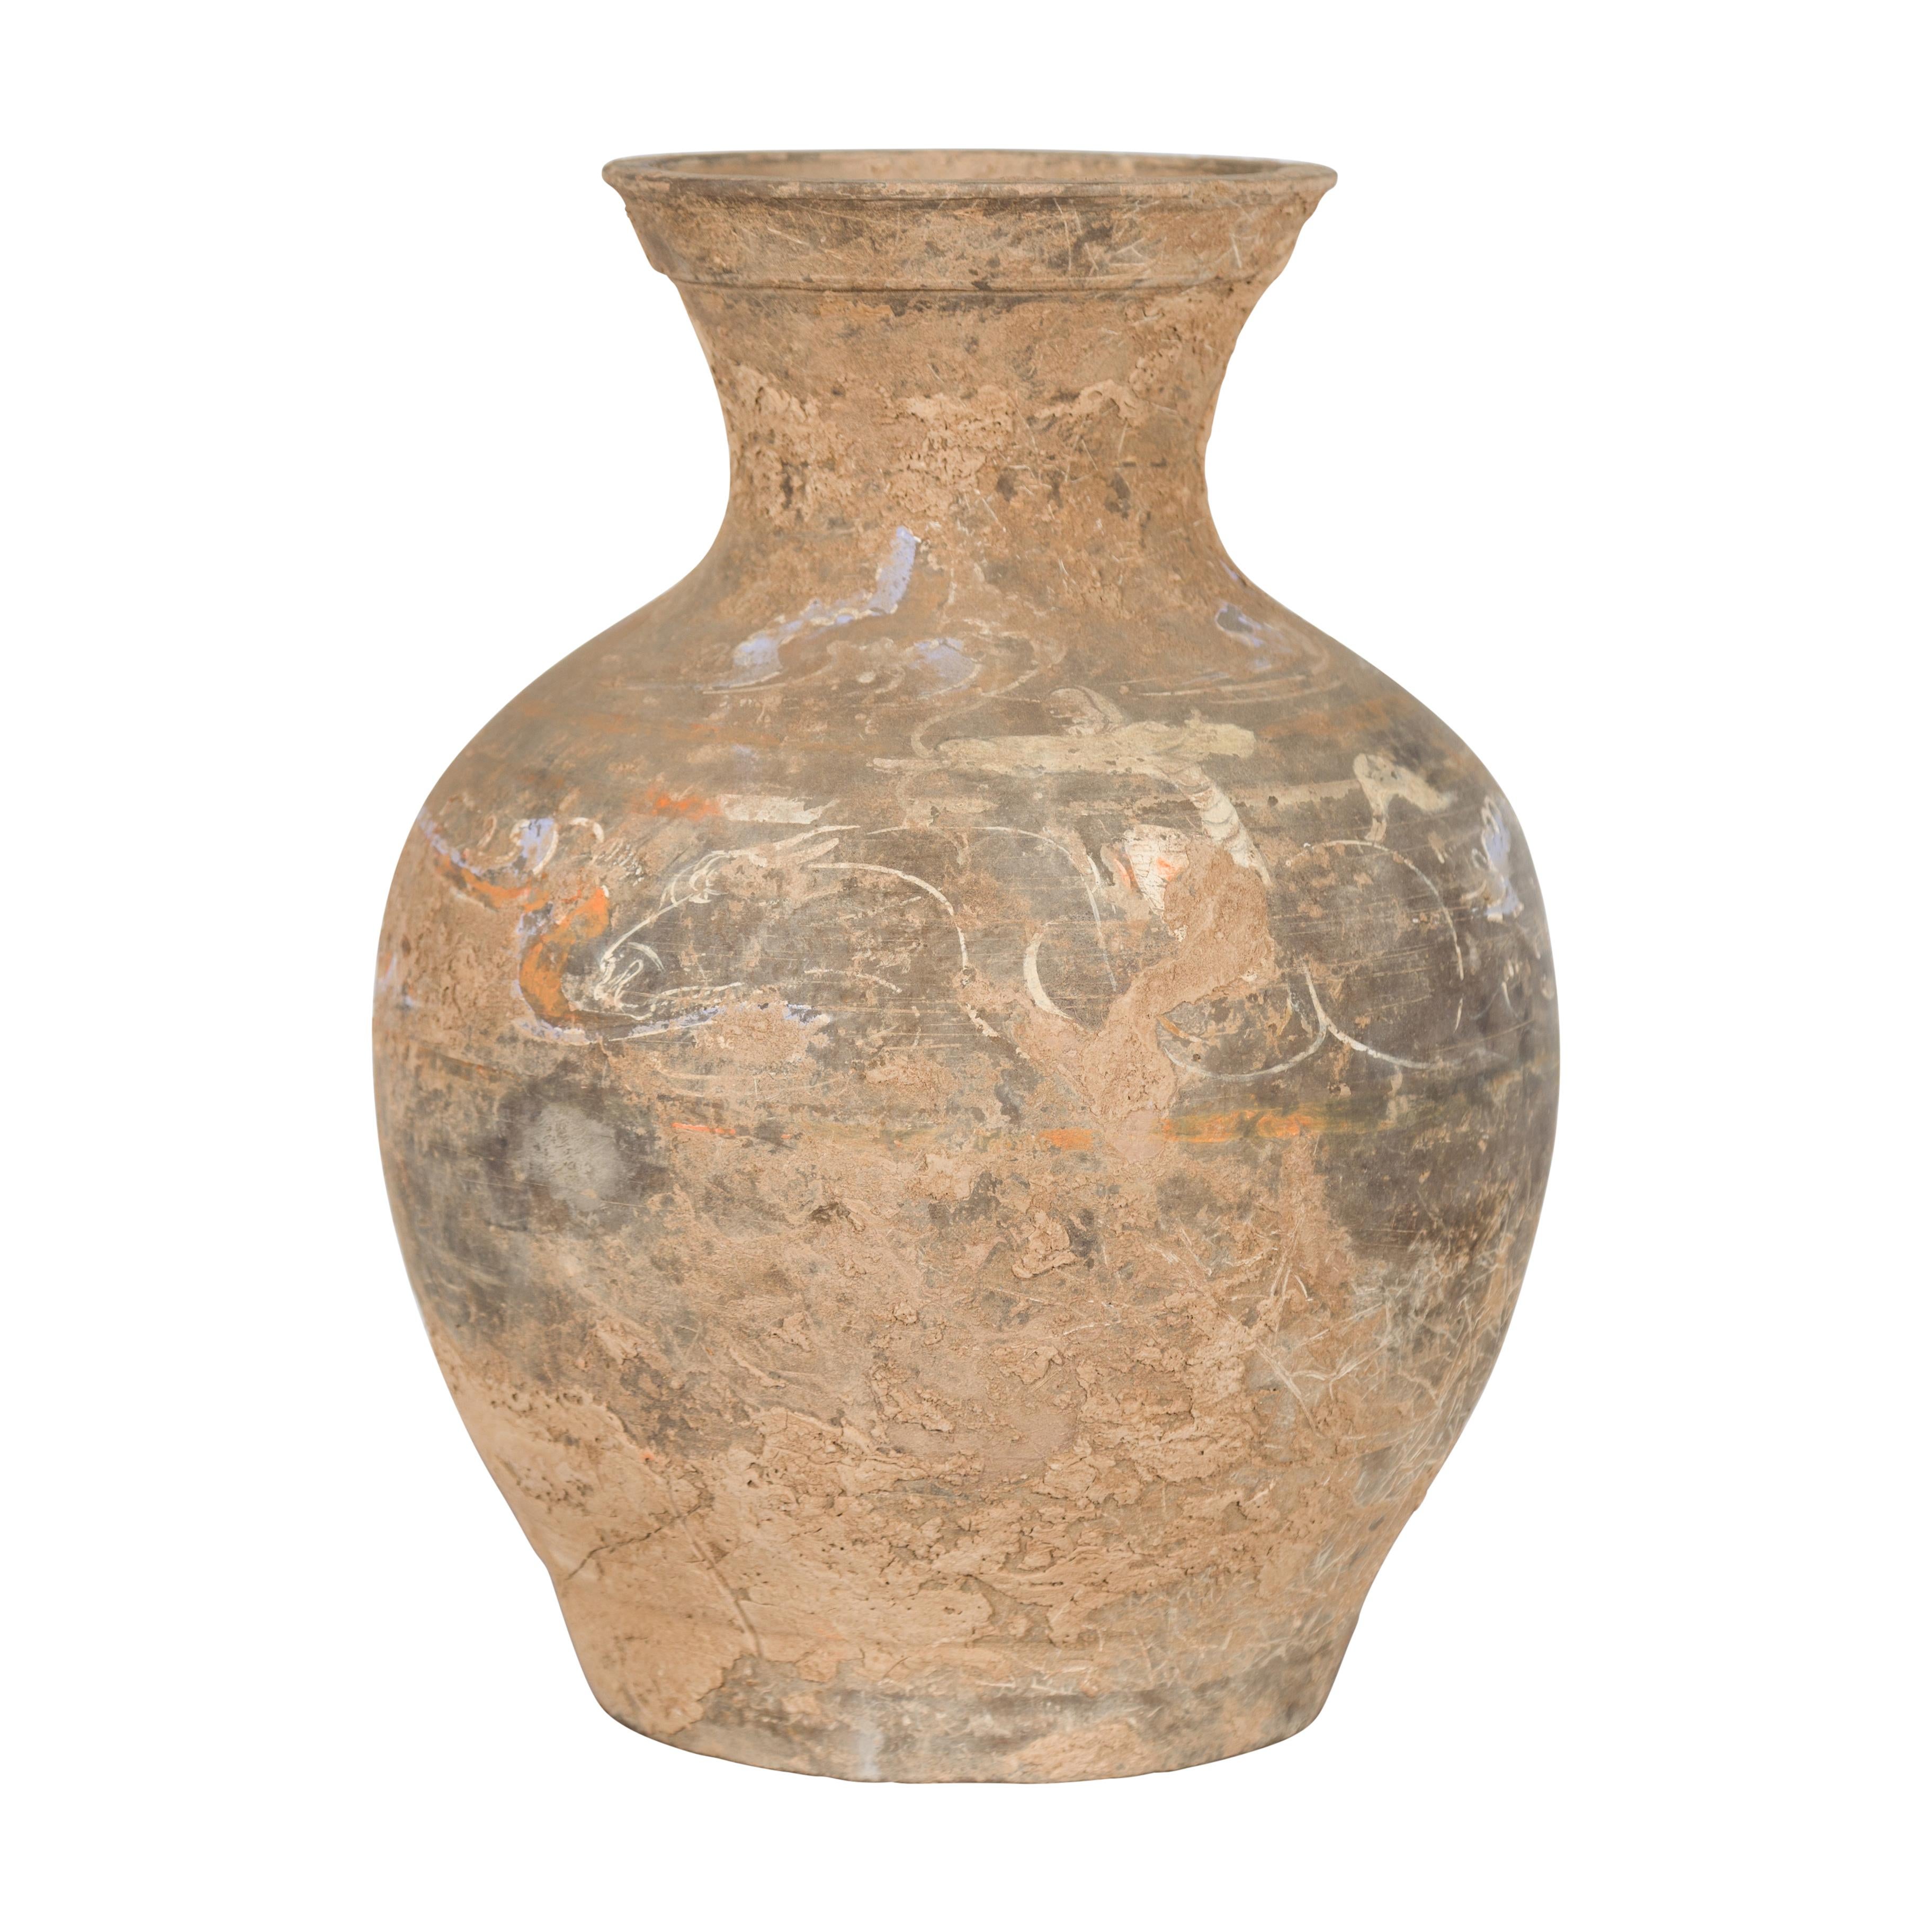 Chinese Han Dynasty Terracotta Vase with Hand-Painted Décor, circa 202 BC-200 AD 12